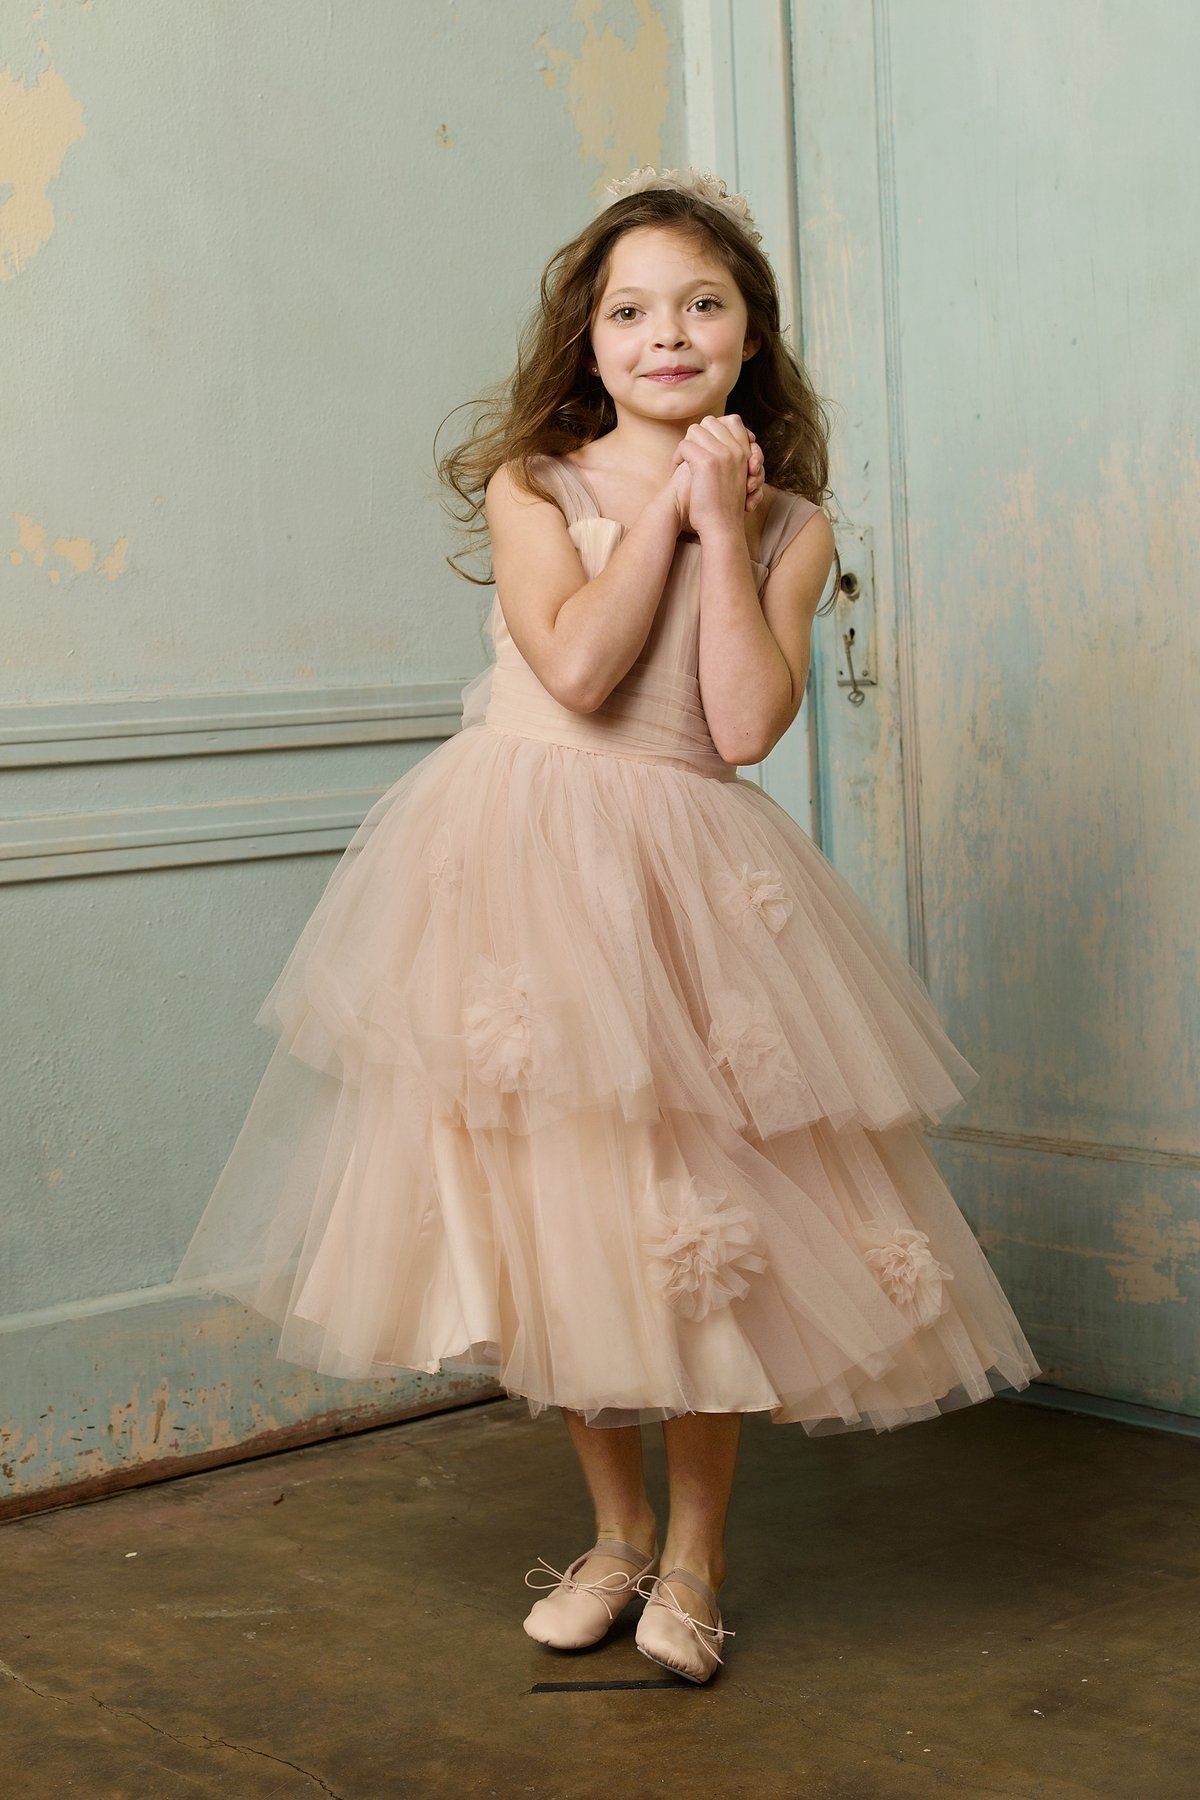 2019 Sweet Square Neck Flower Girl Dresses Ruched A-Line Tulle Tea-Length Champagne Pageant Dresses Girl New Designer